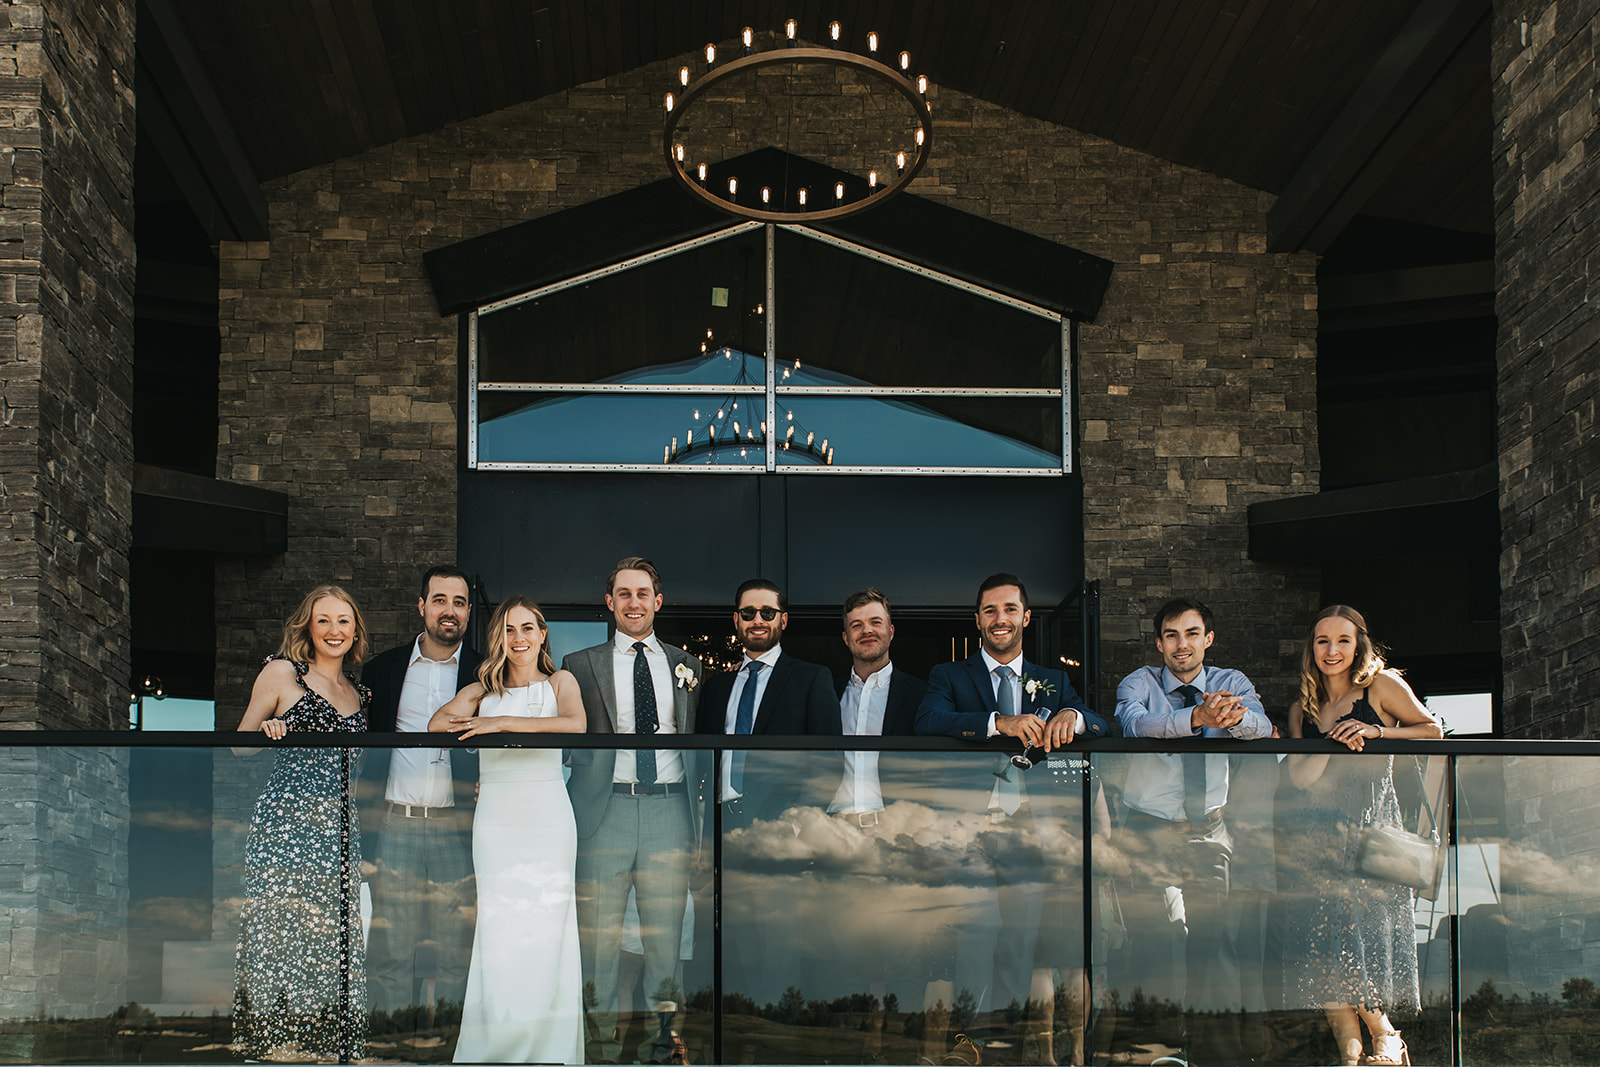 Thomas and Michelle Say I Do: A Mickelson National Golf Club Wedding
